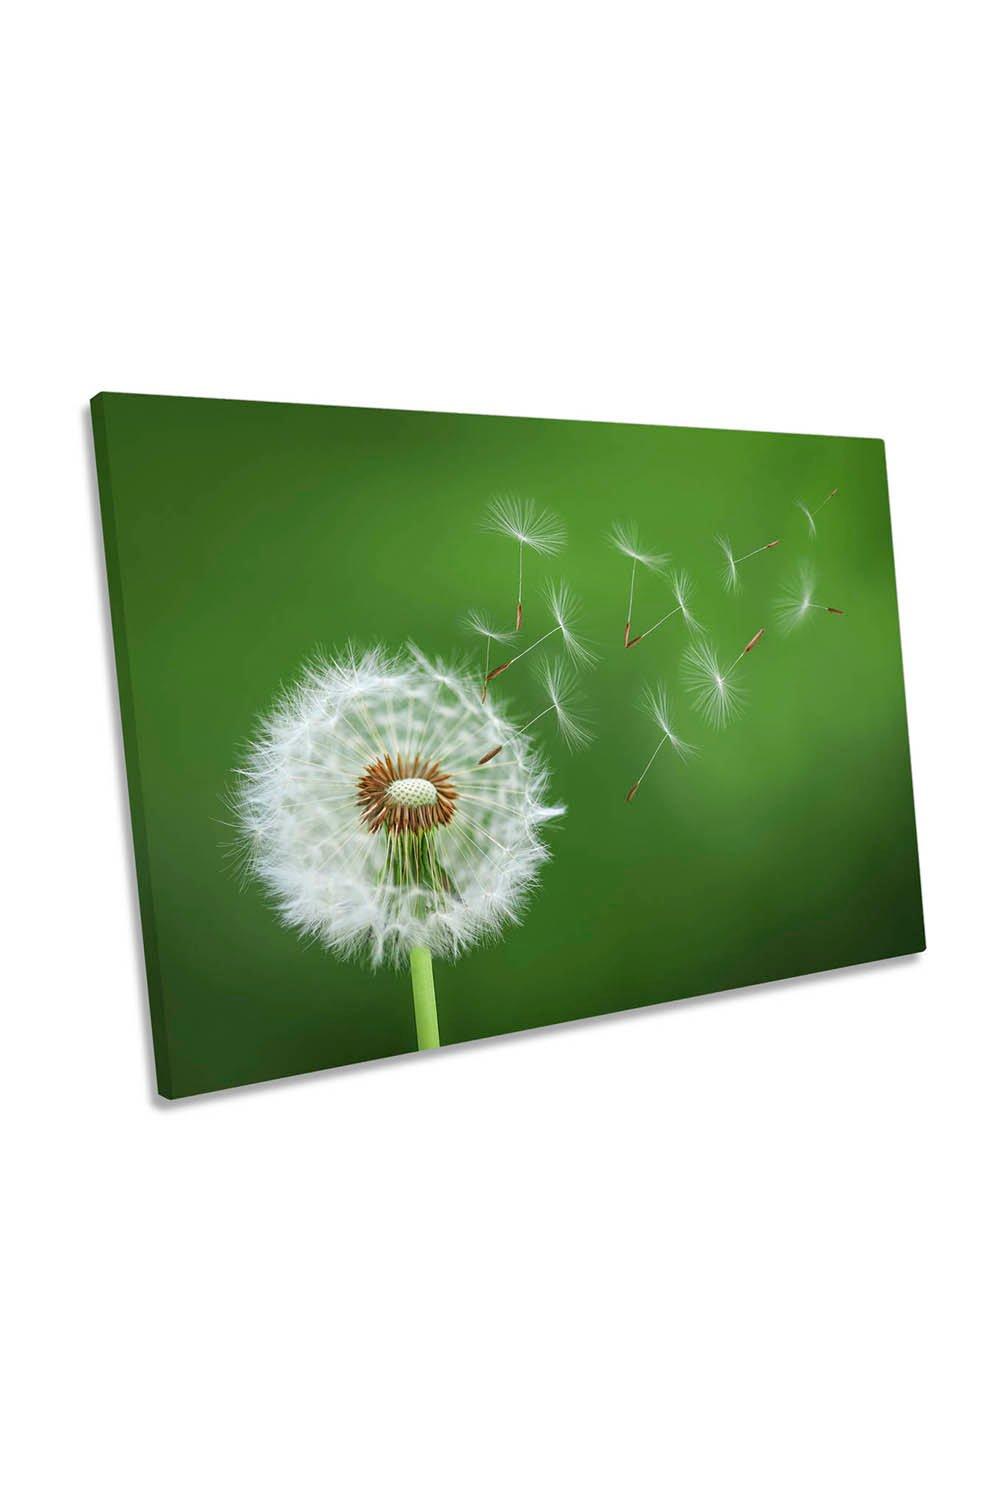 Dandelion Blowing Green Floral Canvas Wall Art Picture Print